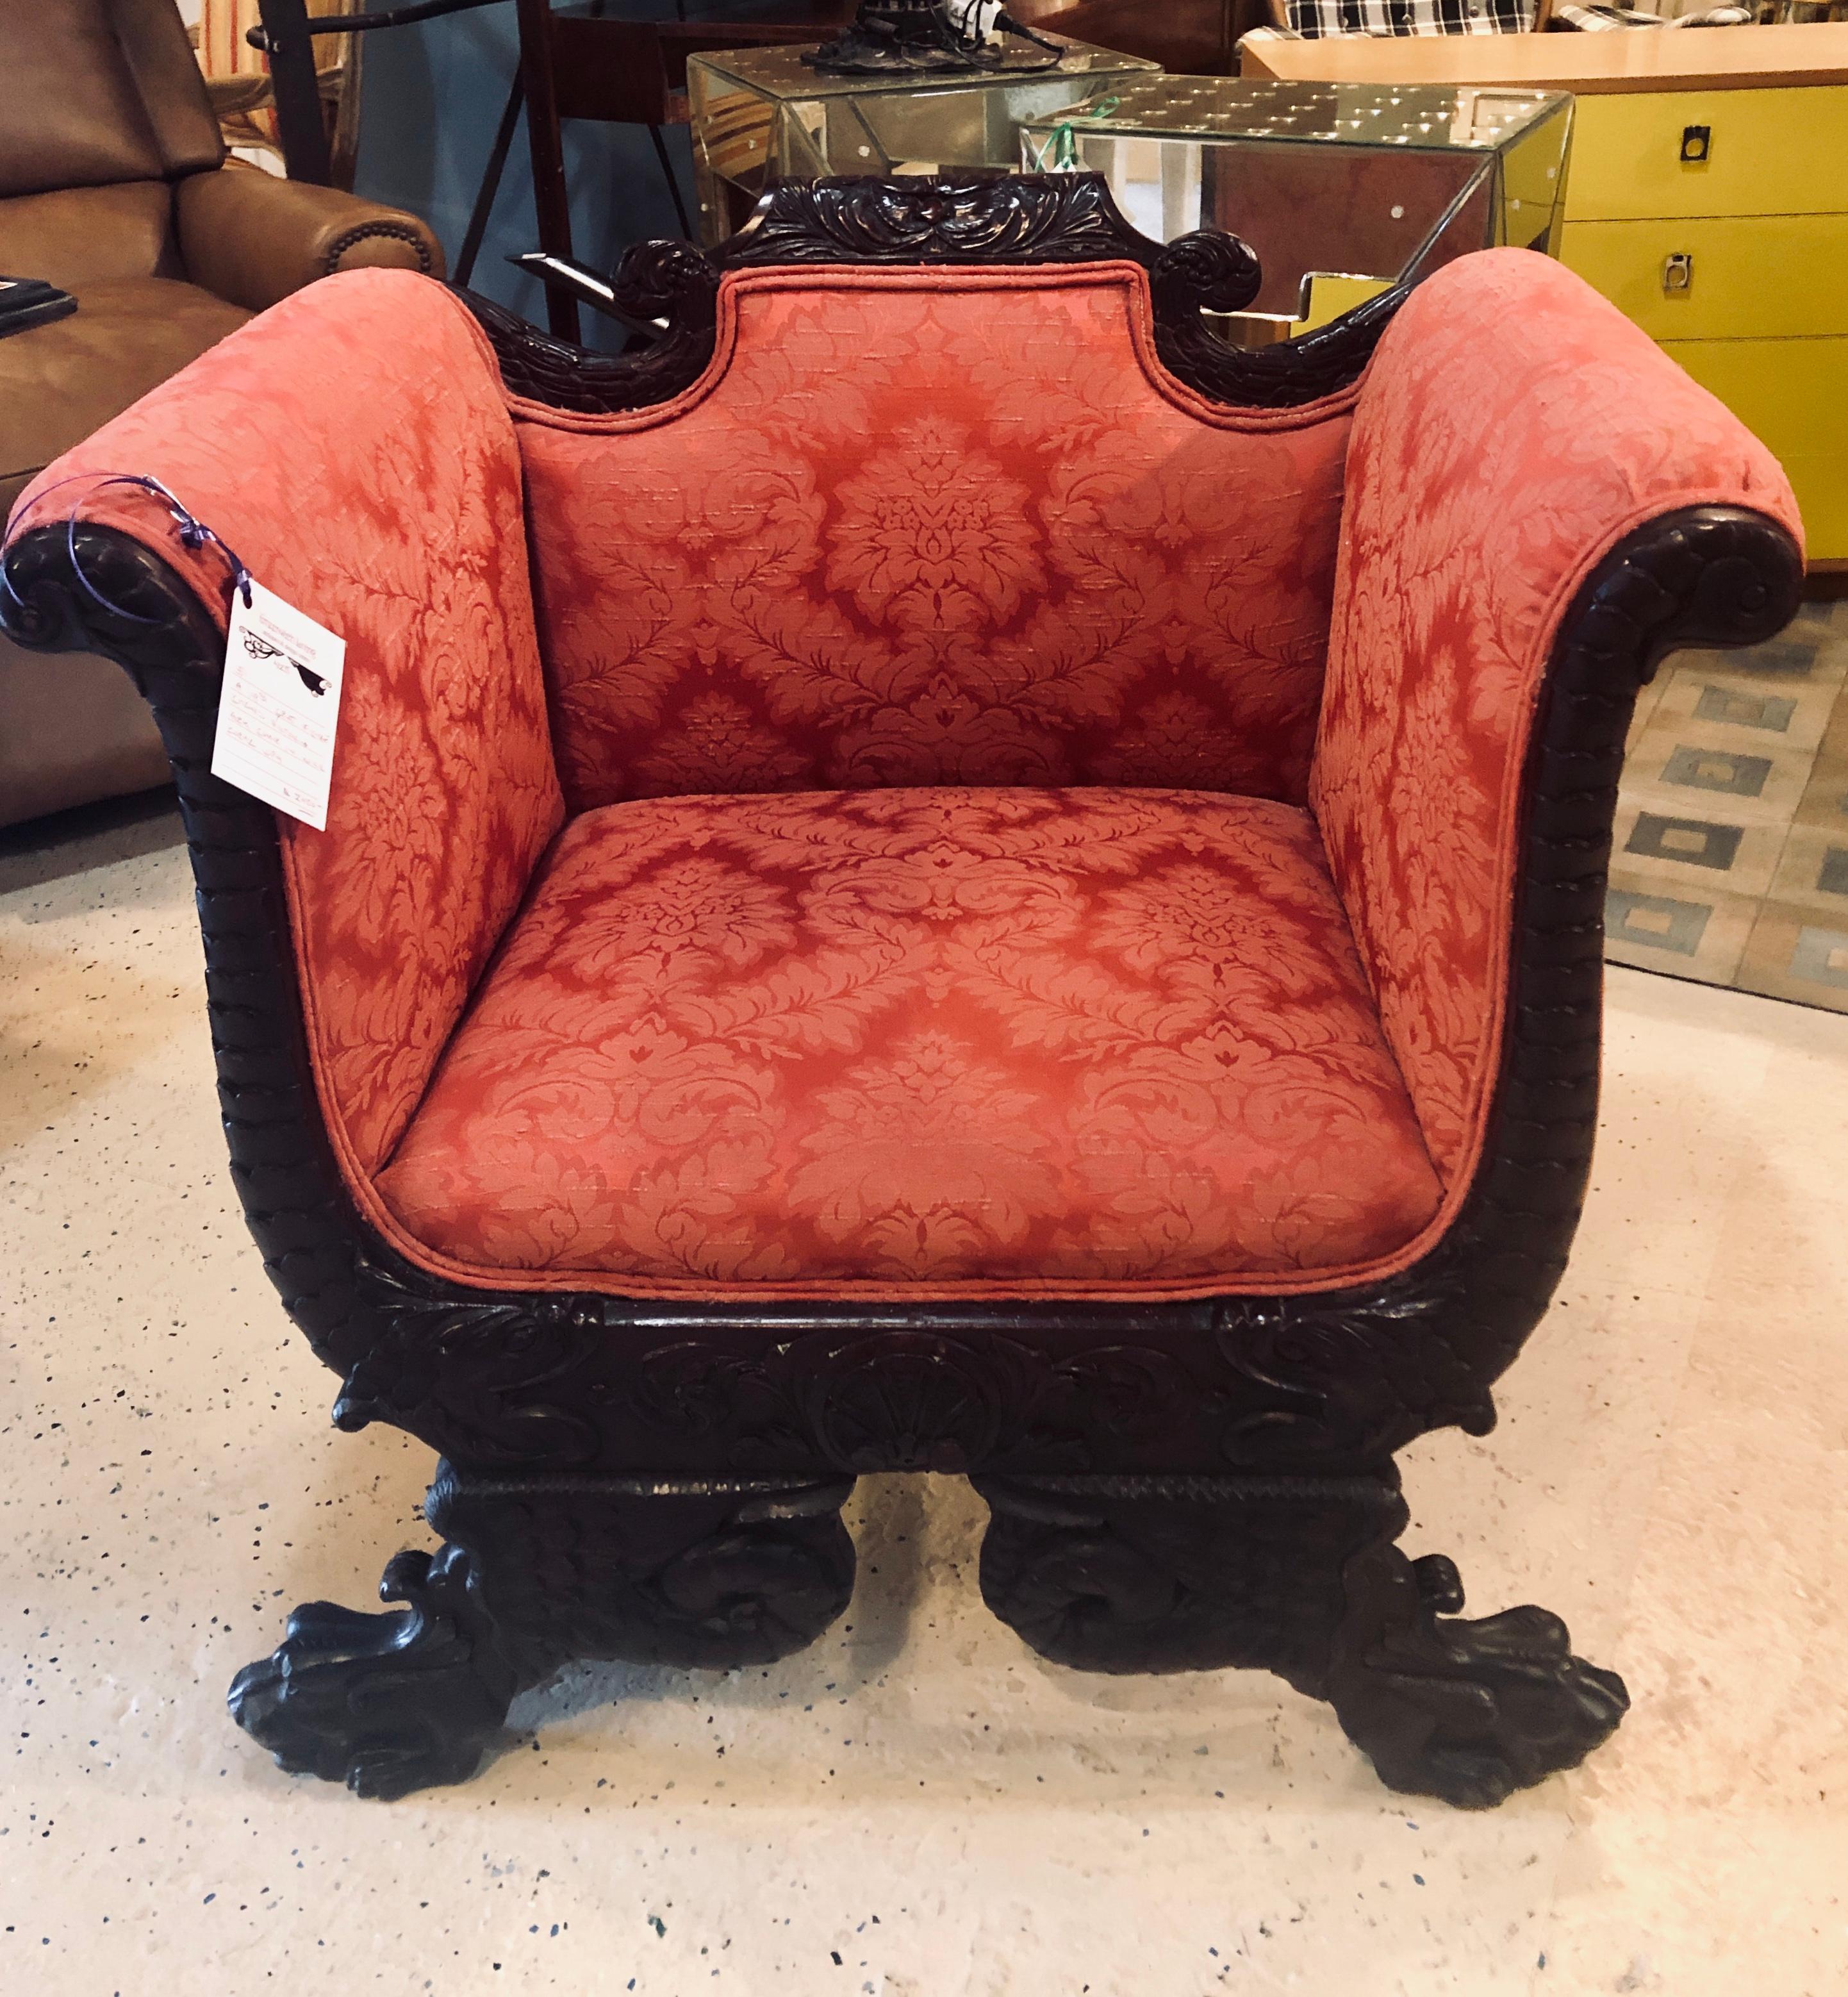 19th century figure carved Victorian armchair in lovely rose colored upholstery. This early finely carved arm or lounge office chair is simply spectacular having figural feet with full tails.